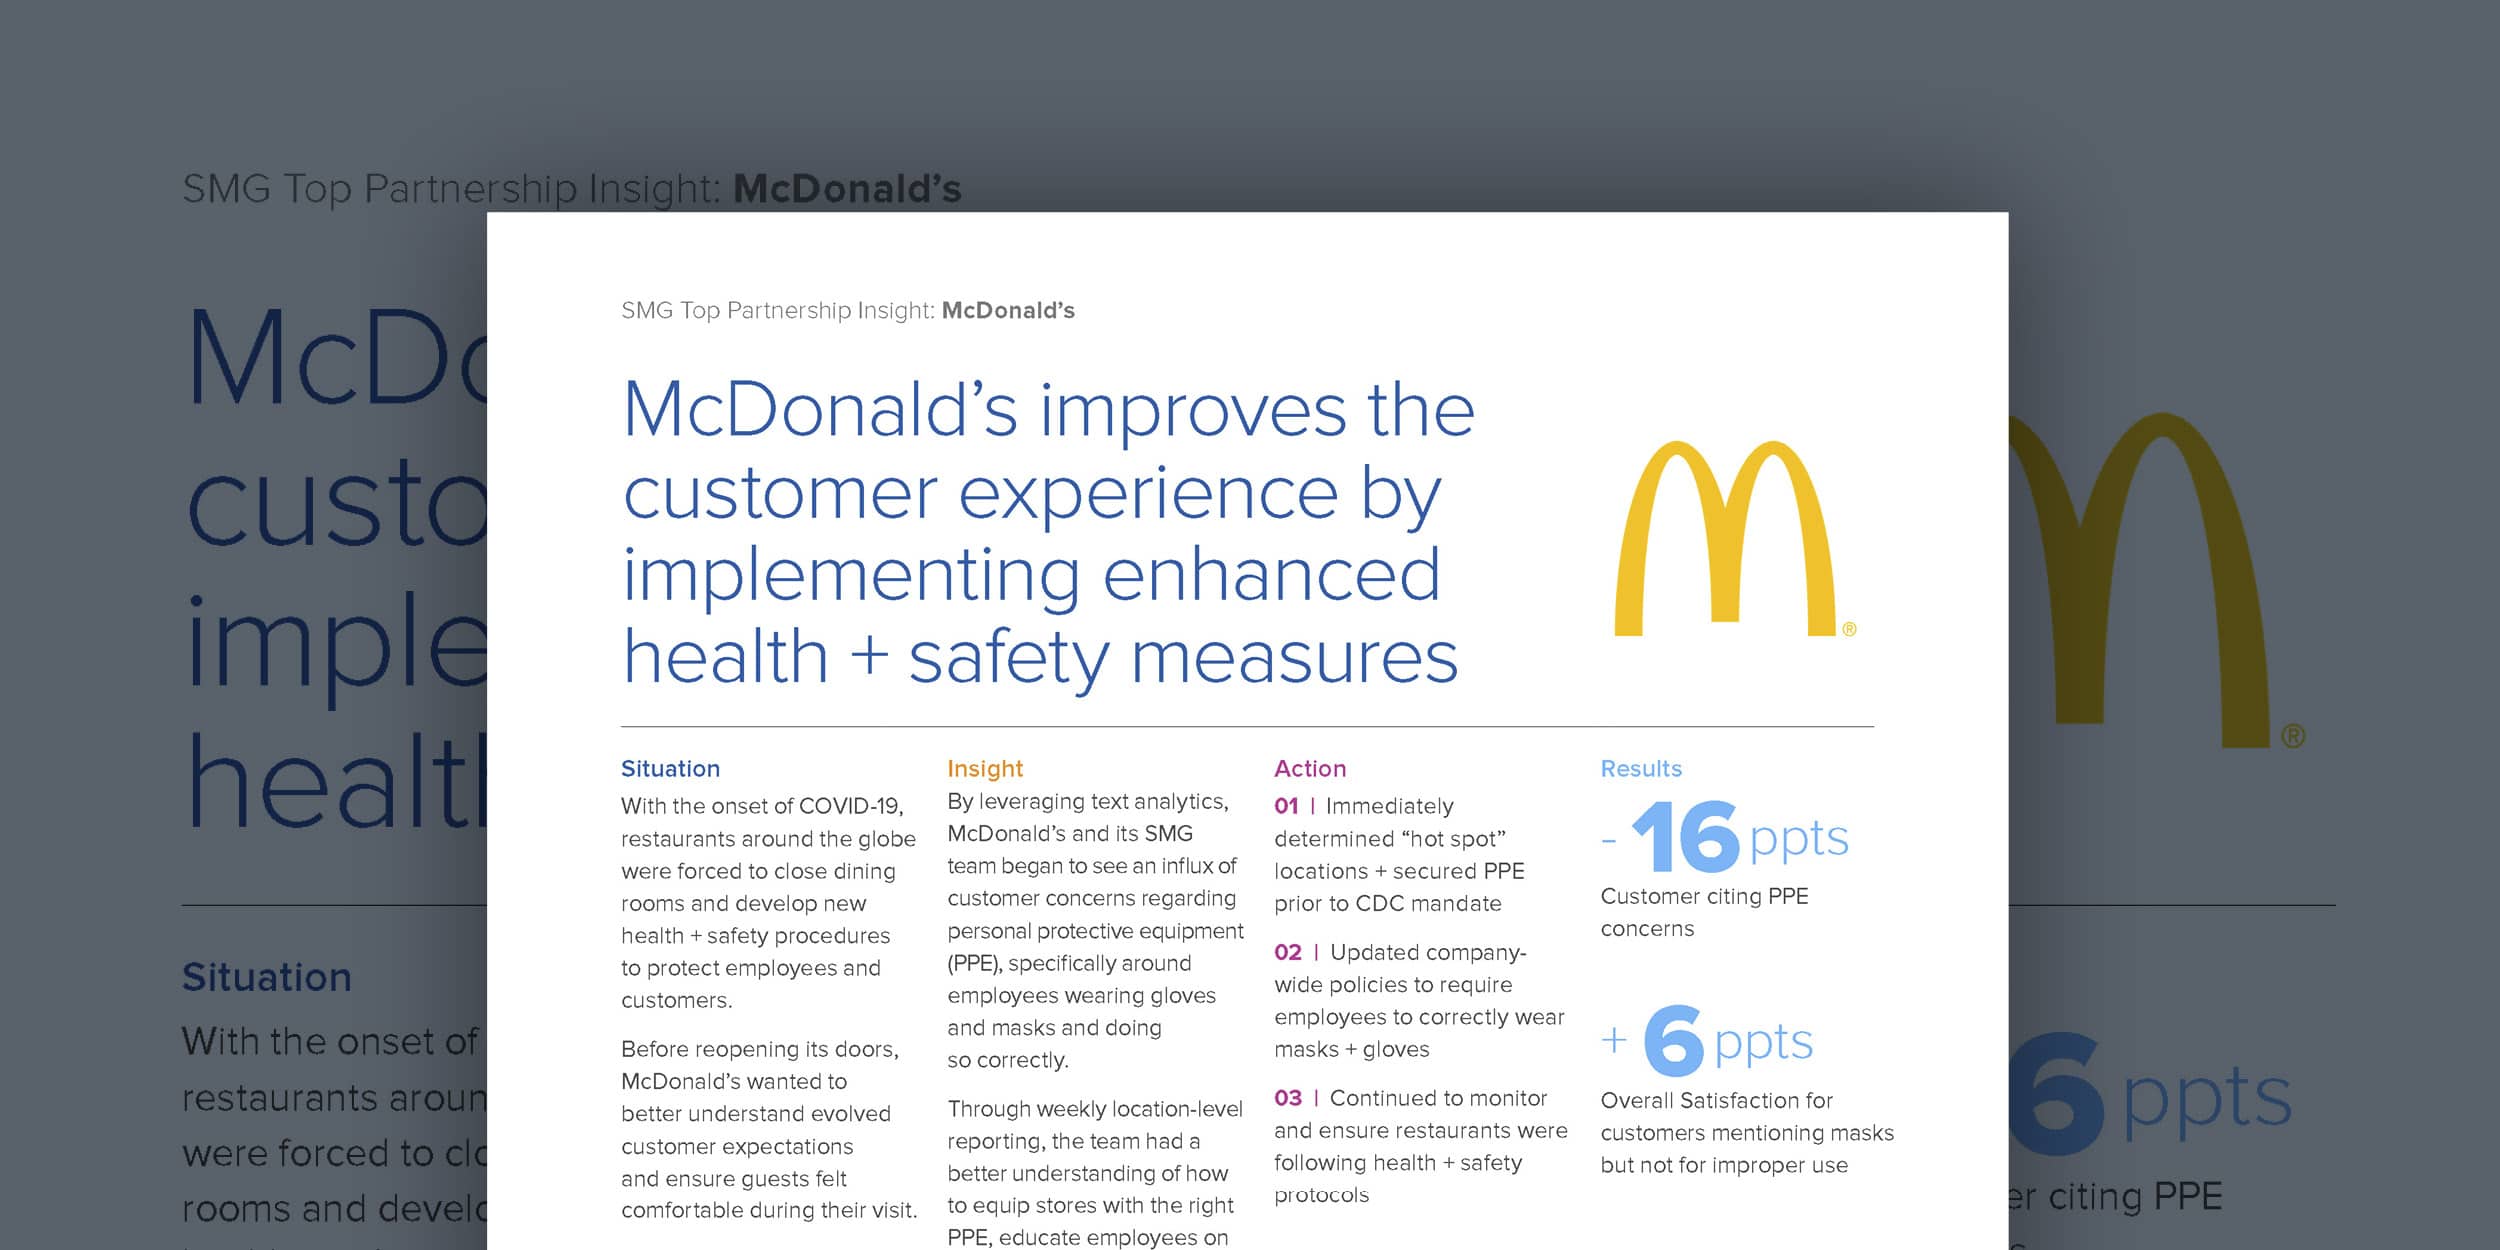 McDonald’s improves the customer experience by responding to customer feedback